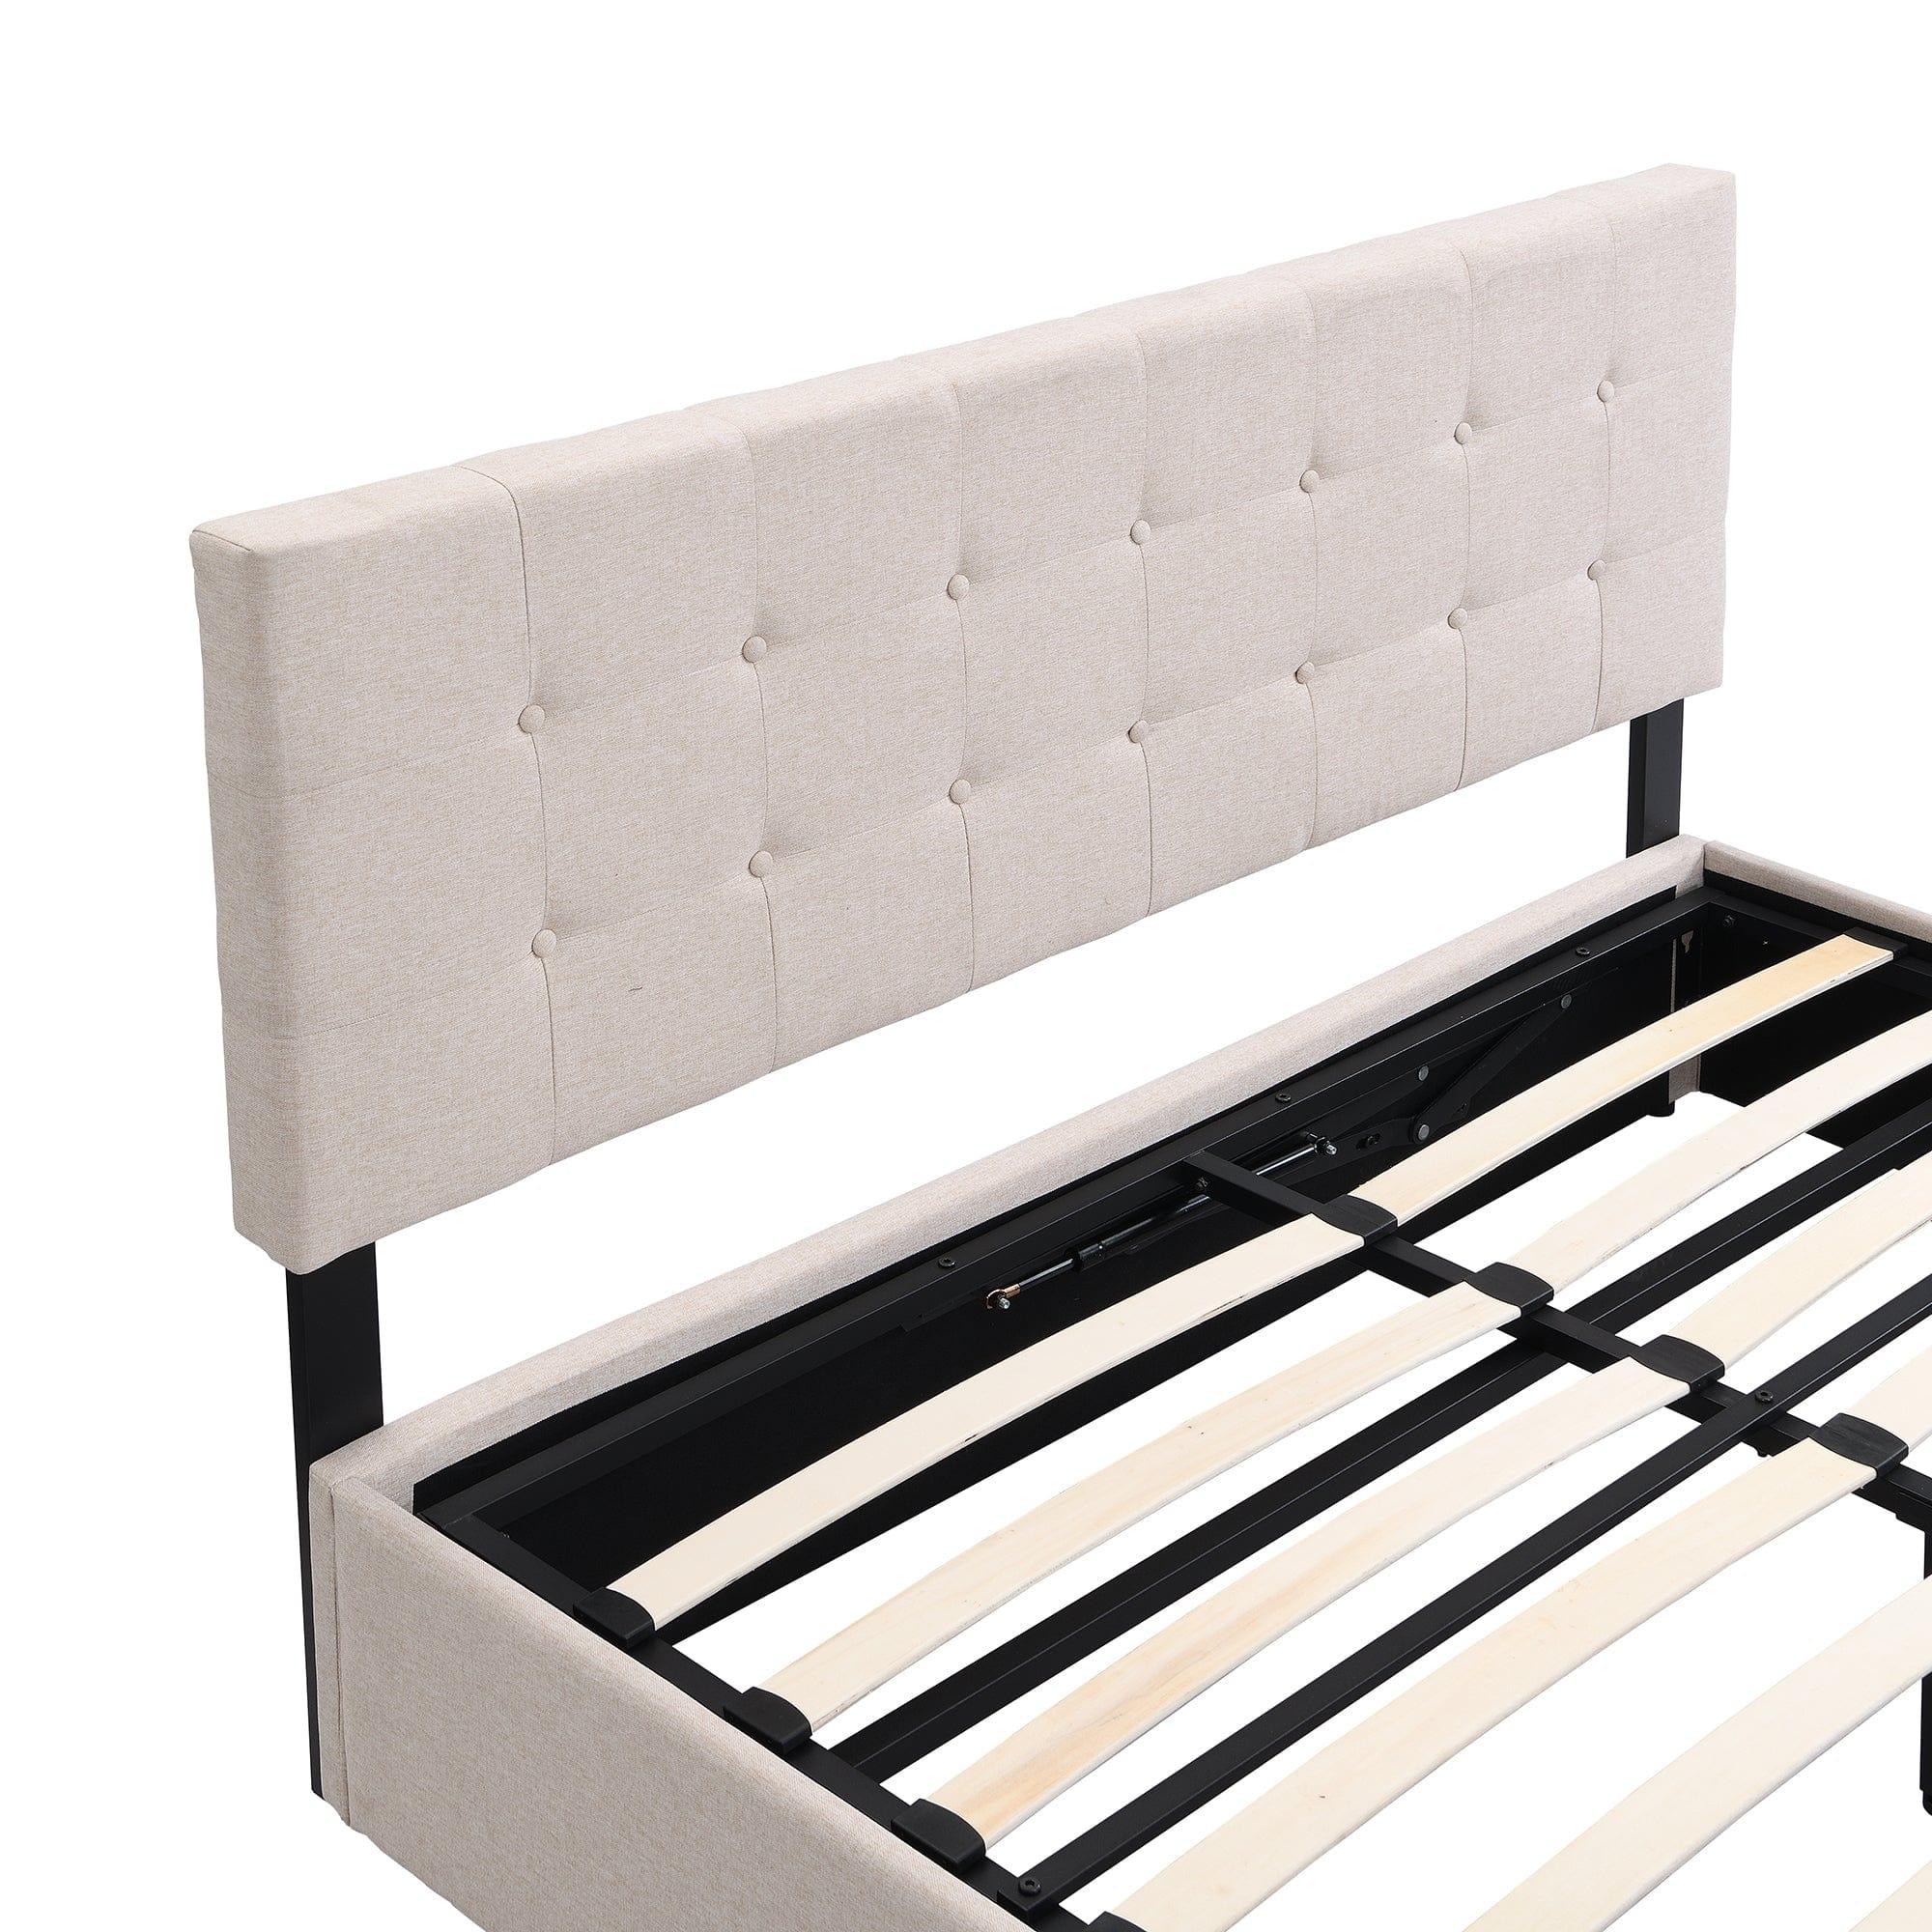 Shop Queen Size Upholstered Platform Bed with Underneath Storage Space,Beige Mademoiselle Home Decor